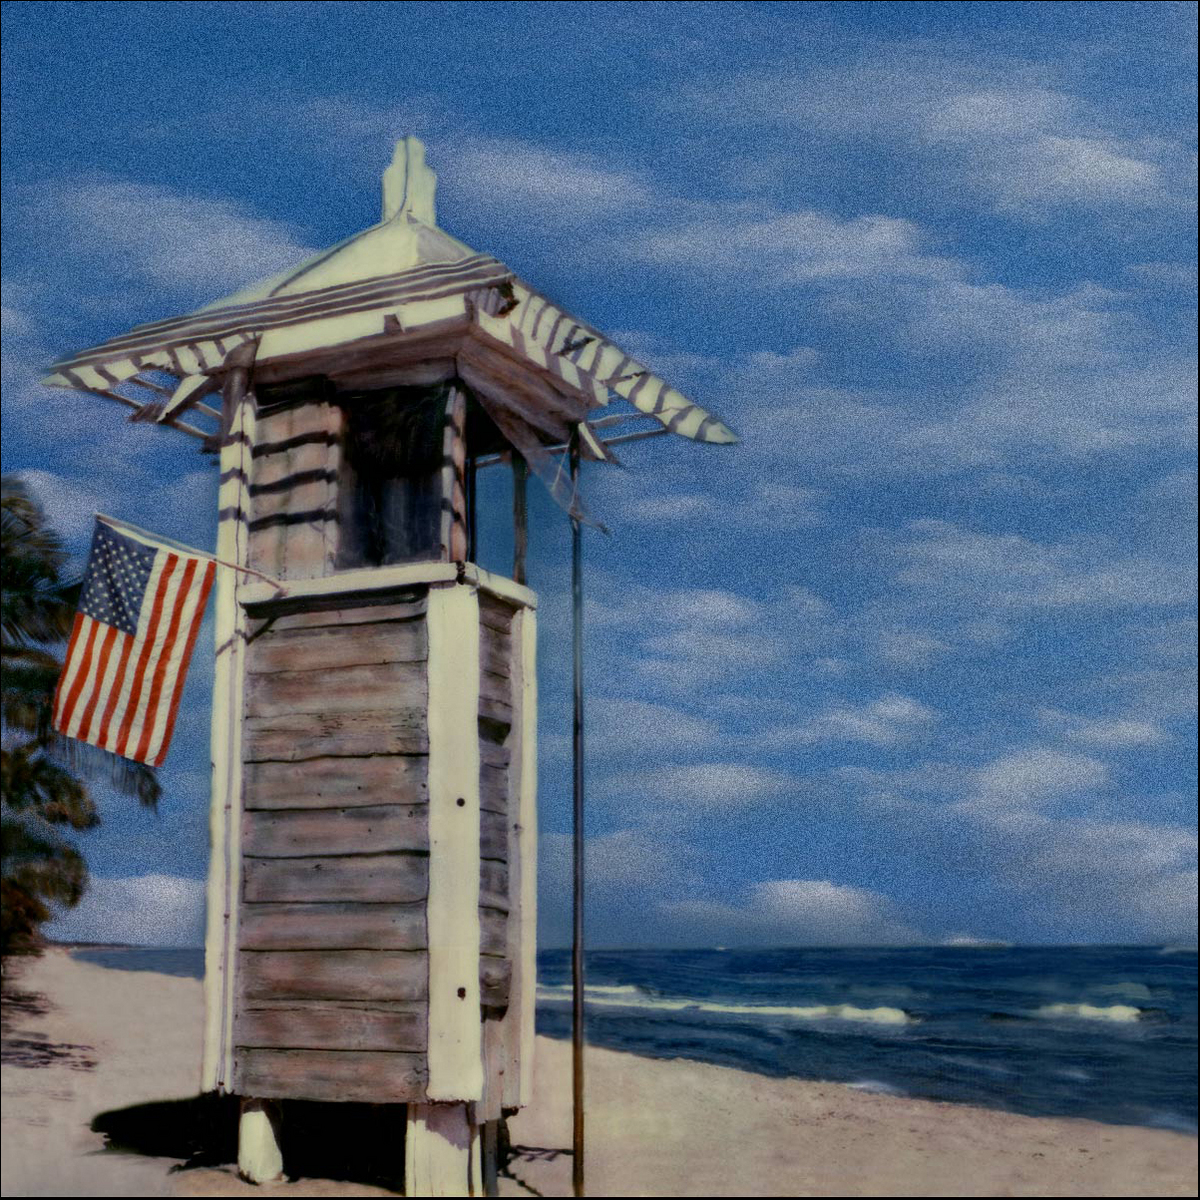 "Old-Style Lifeguard Stand with American Flag" <br>Last of the Retro Stands to be removed from Ft Lauderdale Beach, FL